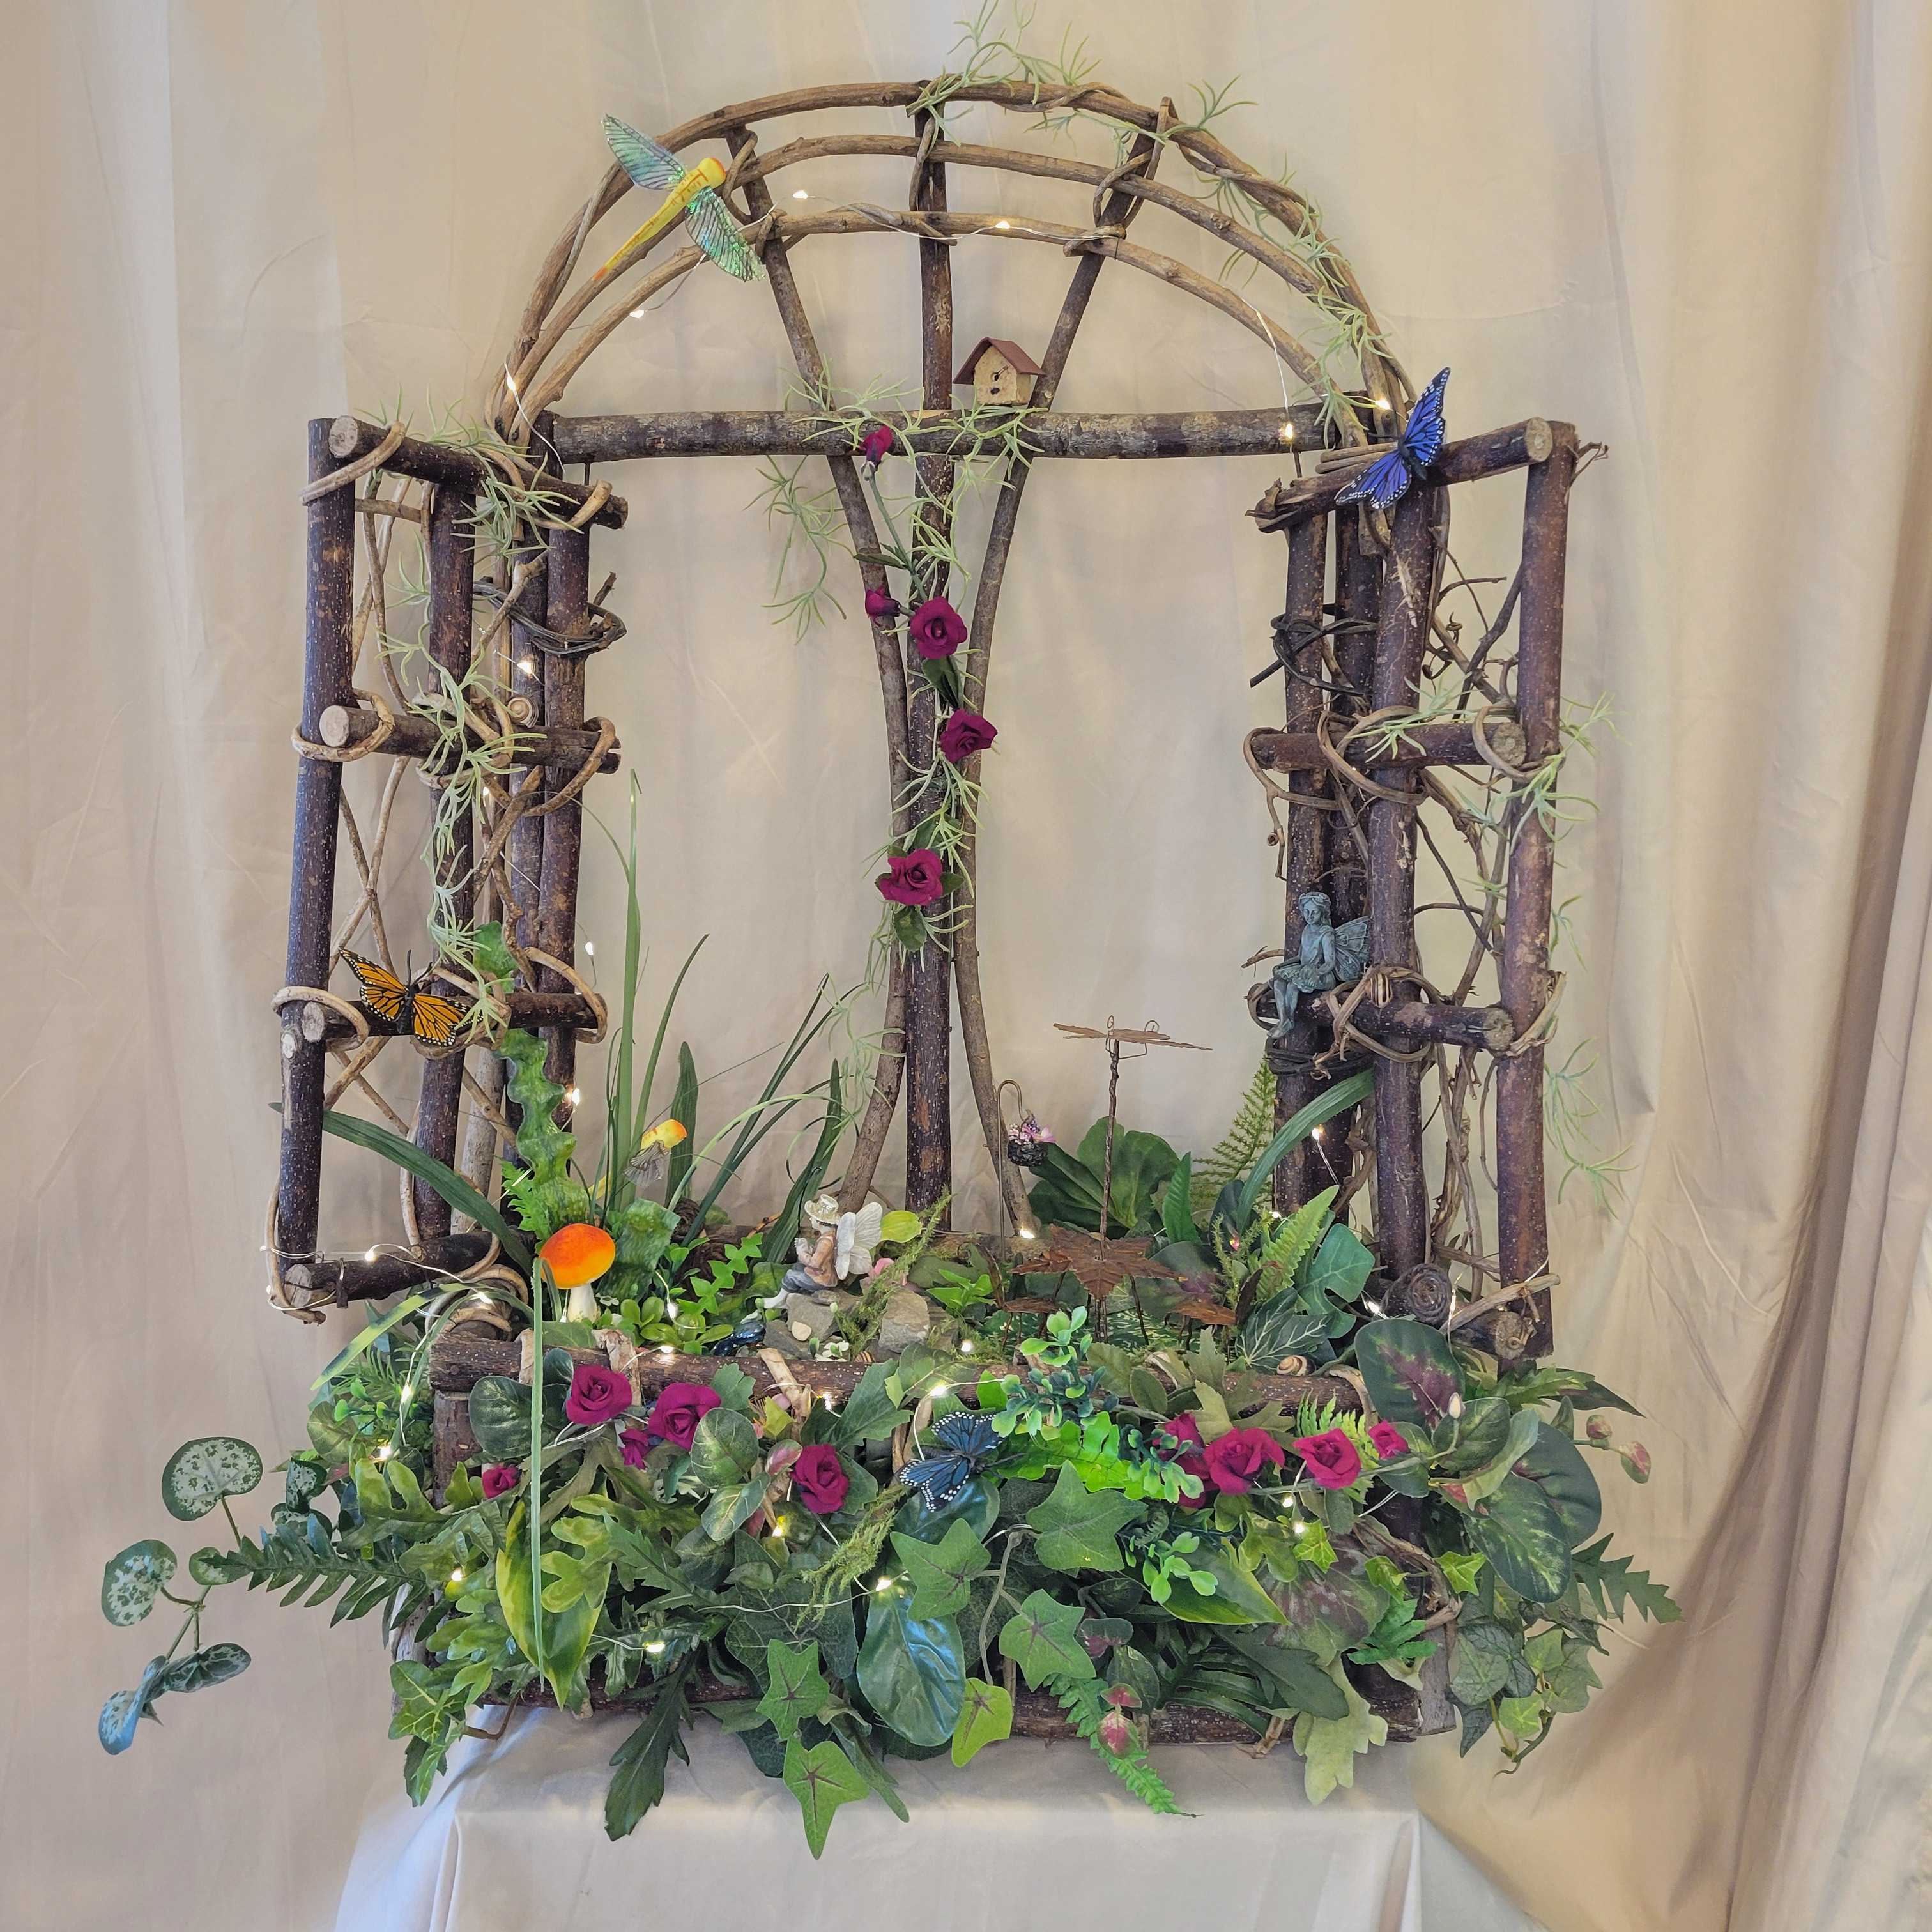 Window into Fairyland by Rene - Absolutely a window into fairyland!  Fairies of course, dragon flies, butterflies, birdhouse a pond to fish in, table and chairs to relax...  Fairylights all around the windowbox with hanger for a wall or can sit on a table. (28&quot; high x 29&quot; long x 7&quot; wide)